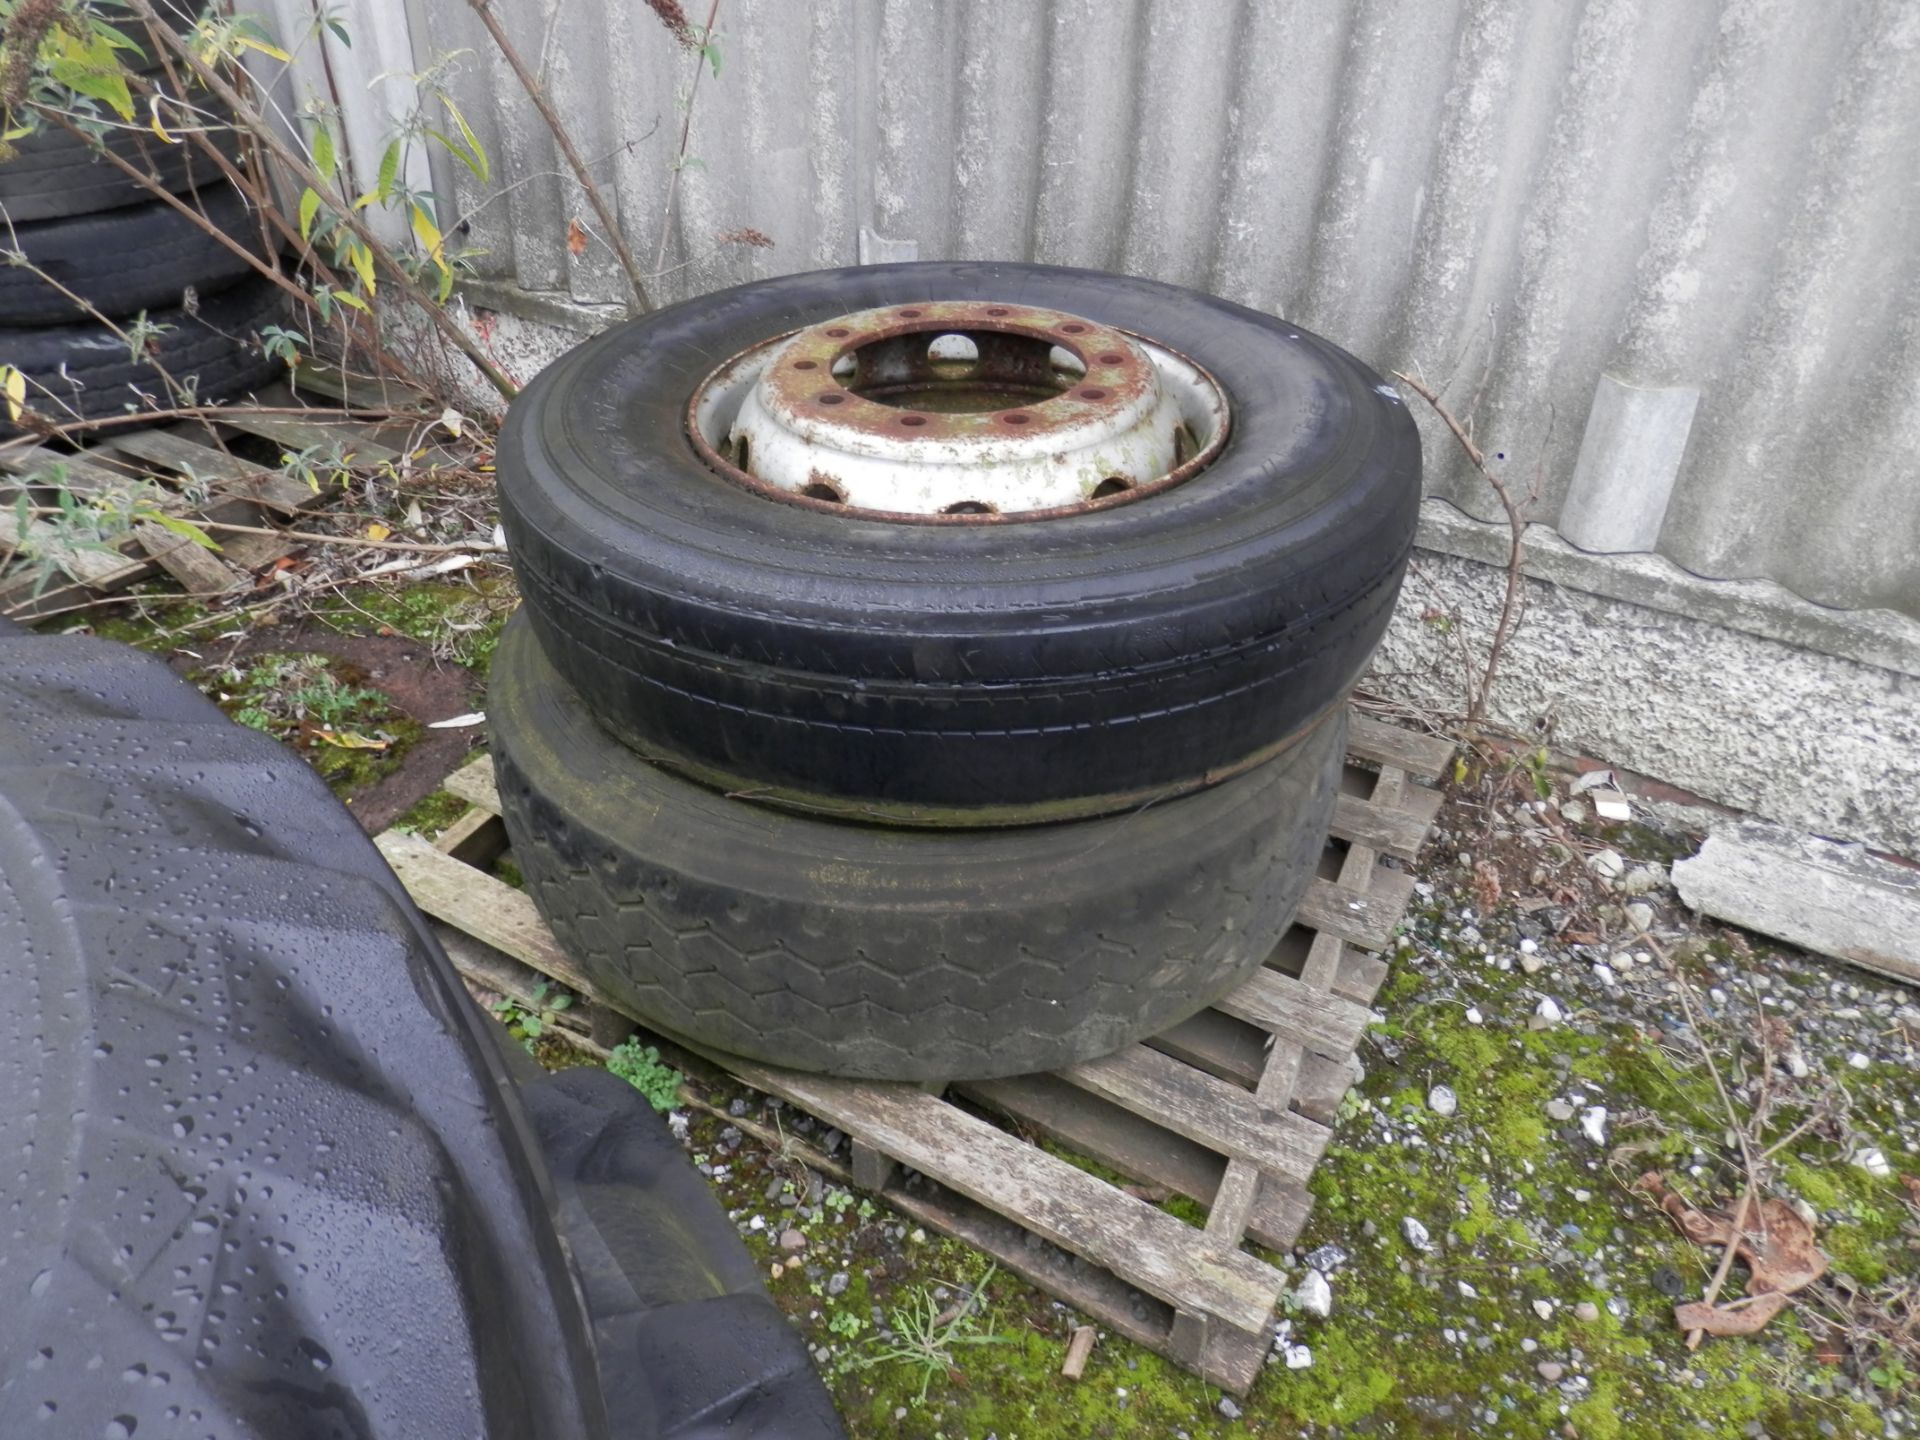 85 + ASSORTED LORRY, CAR & TRAILER TYRES & WHEELS, AS PICTURED. BUYER TO COLLECT COMPLETE - Image 3 of 10